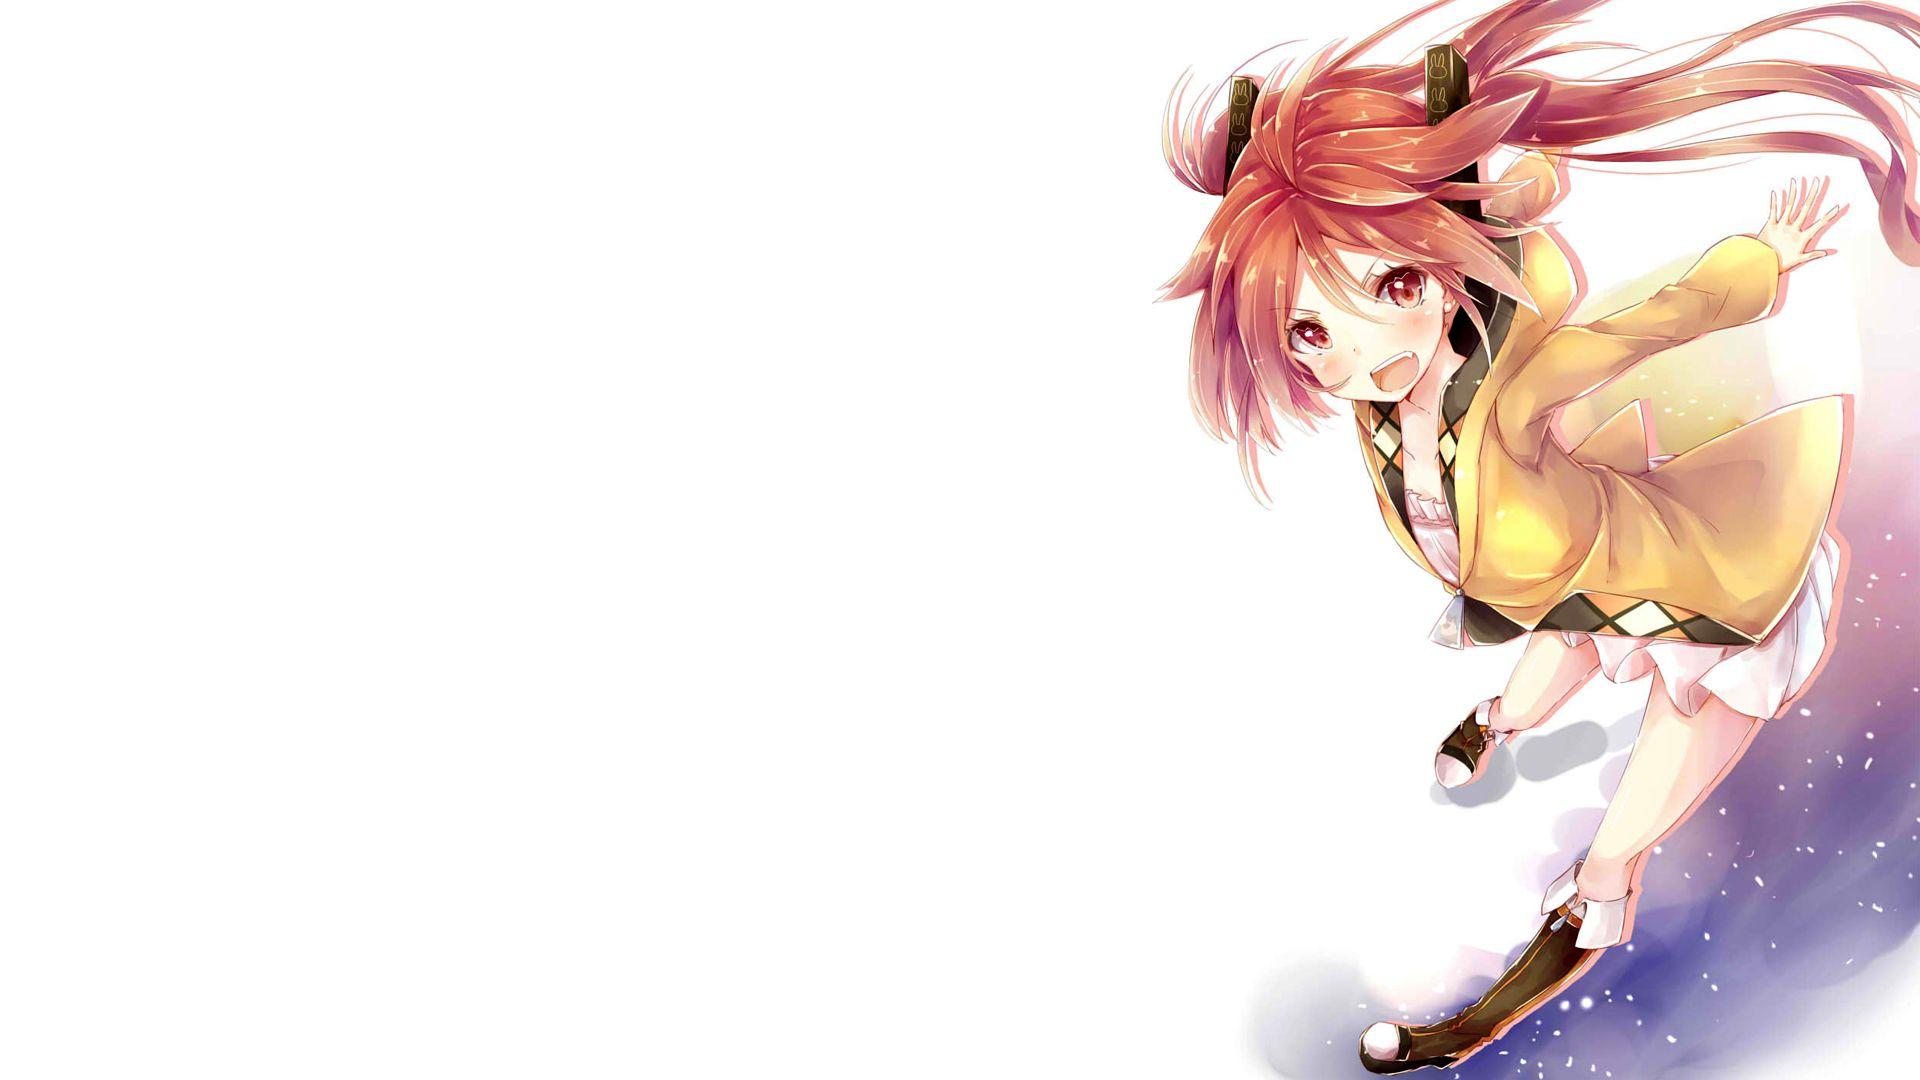 60+ Black Bullet HD Wallpapers and Backgrounds